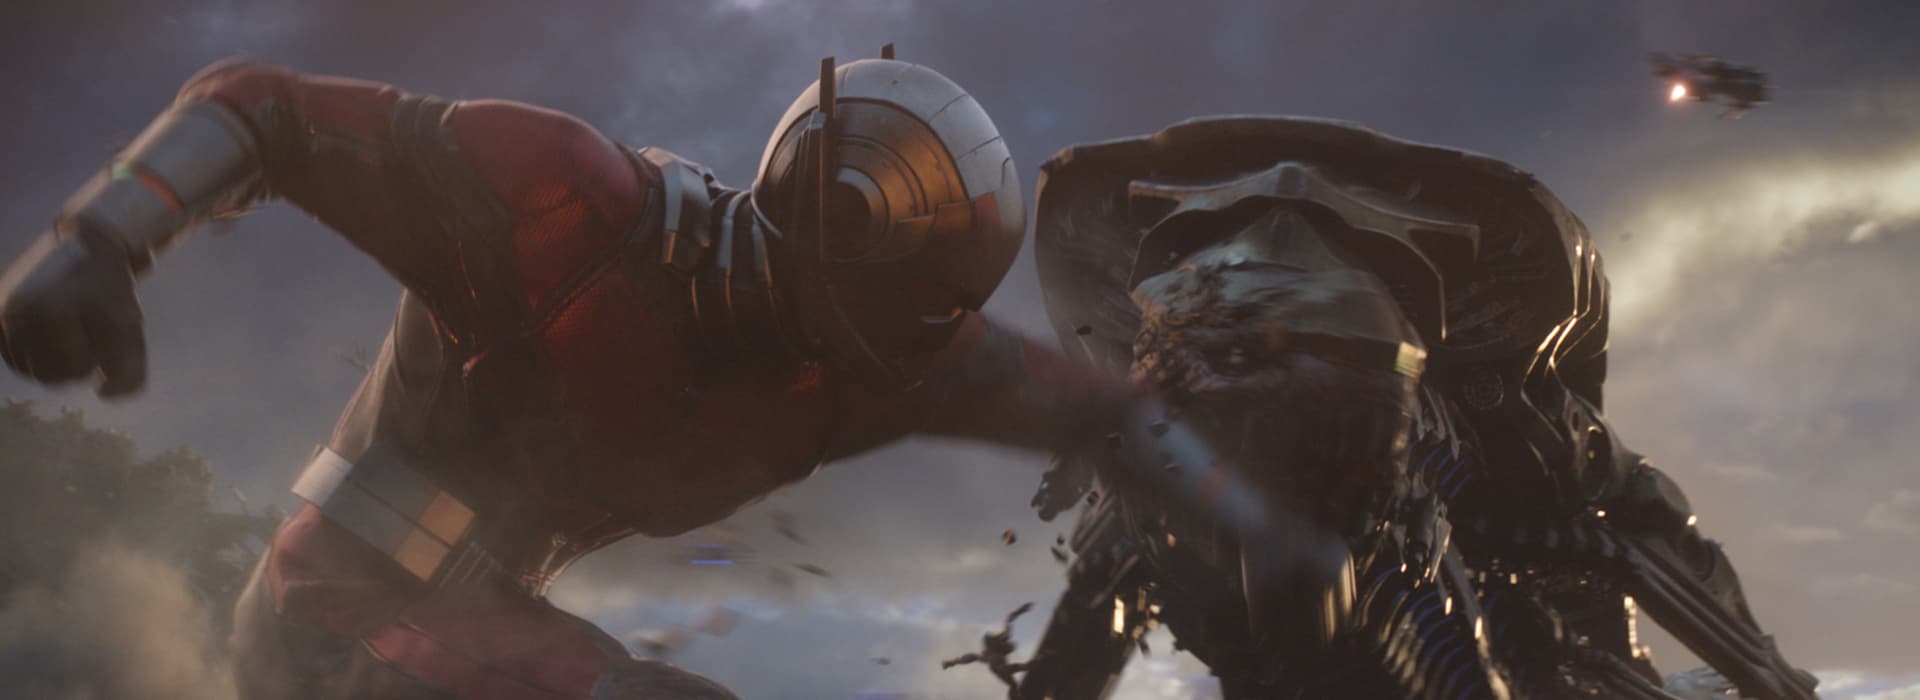 Ant-Man (Scott Lang) Quote “Why don’t you pick on someone your own size?”